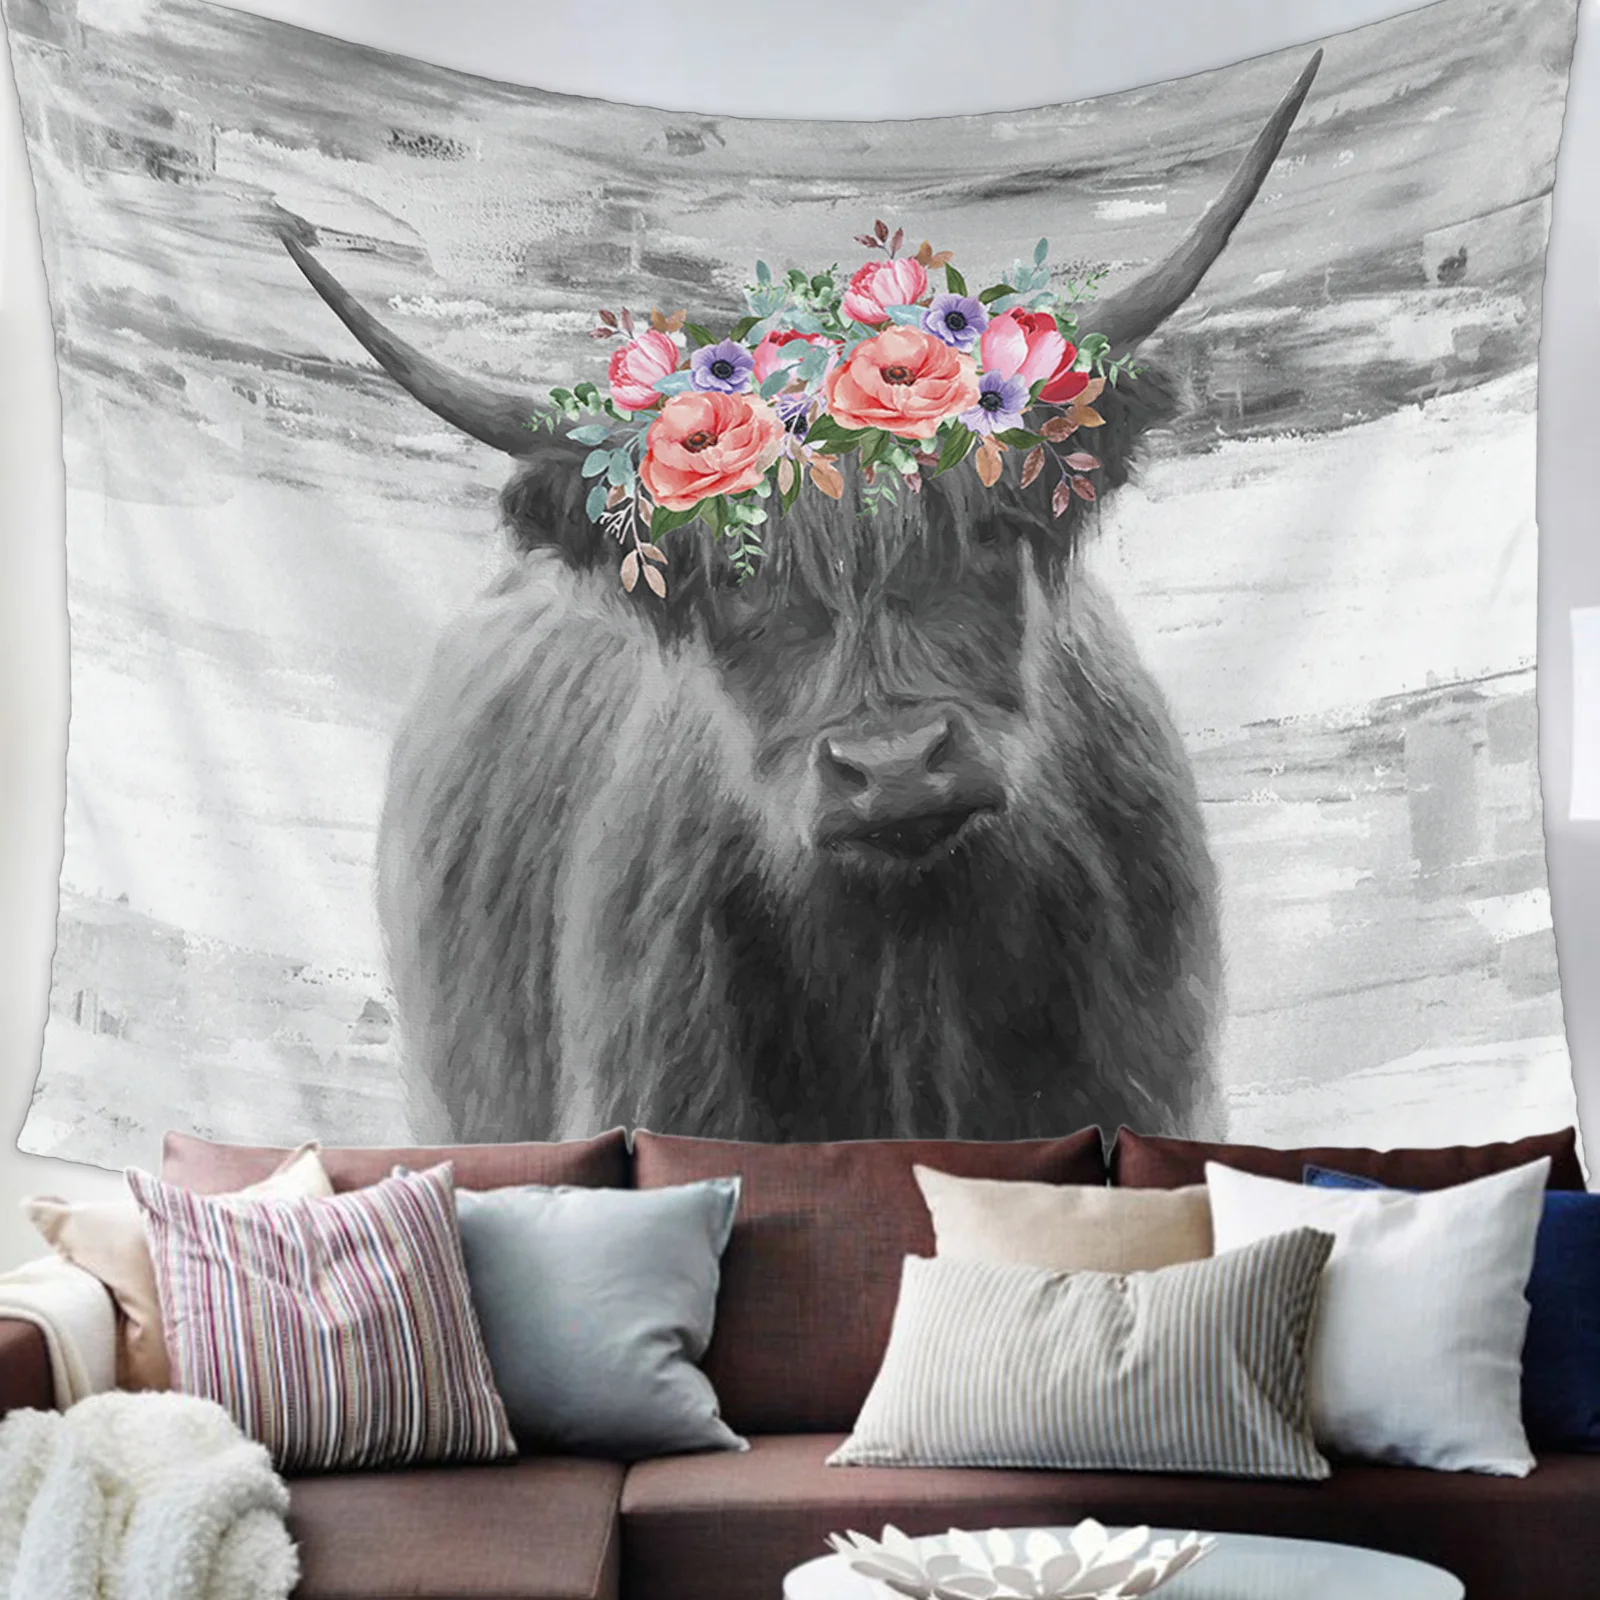 

Idyllic Farm Animal Highland Cattle Tapestry Wall Hanging Living Room Decor Wall Hanging Tapestry Yoga Mat Home Decor Art